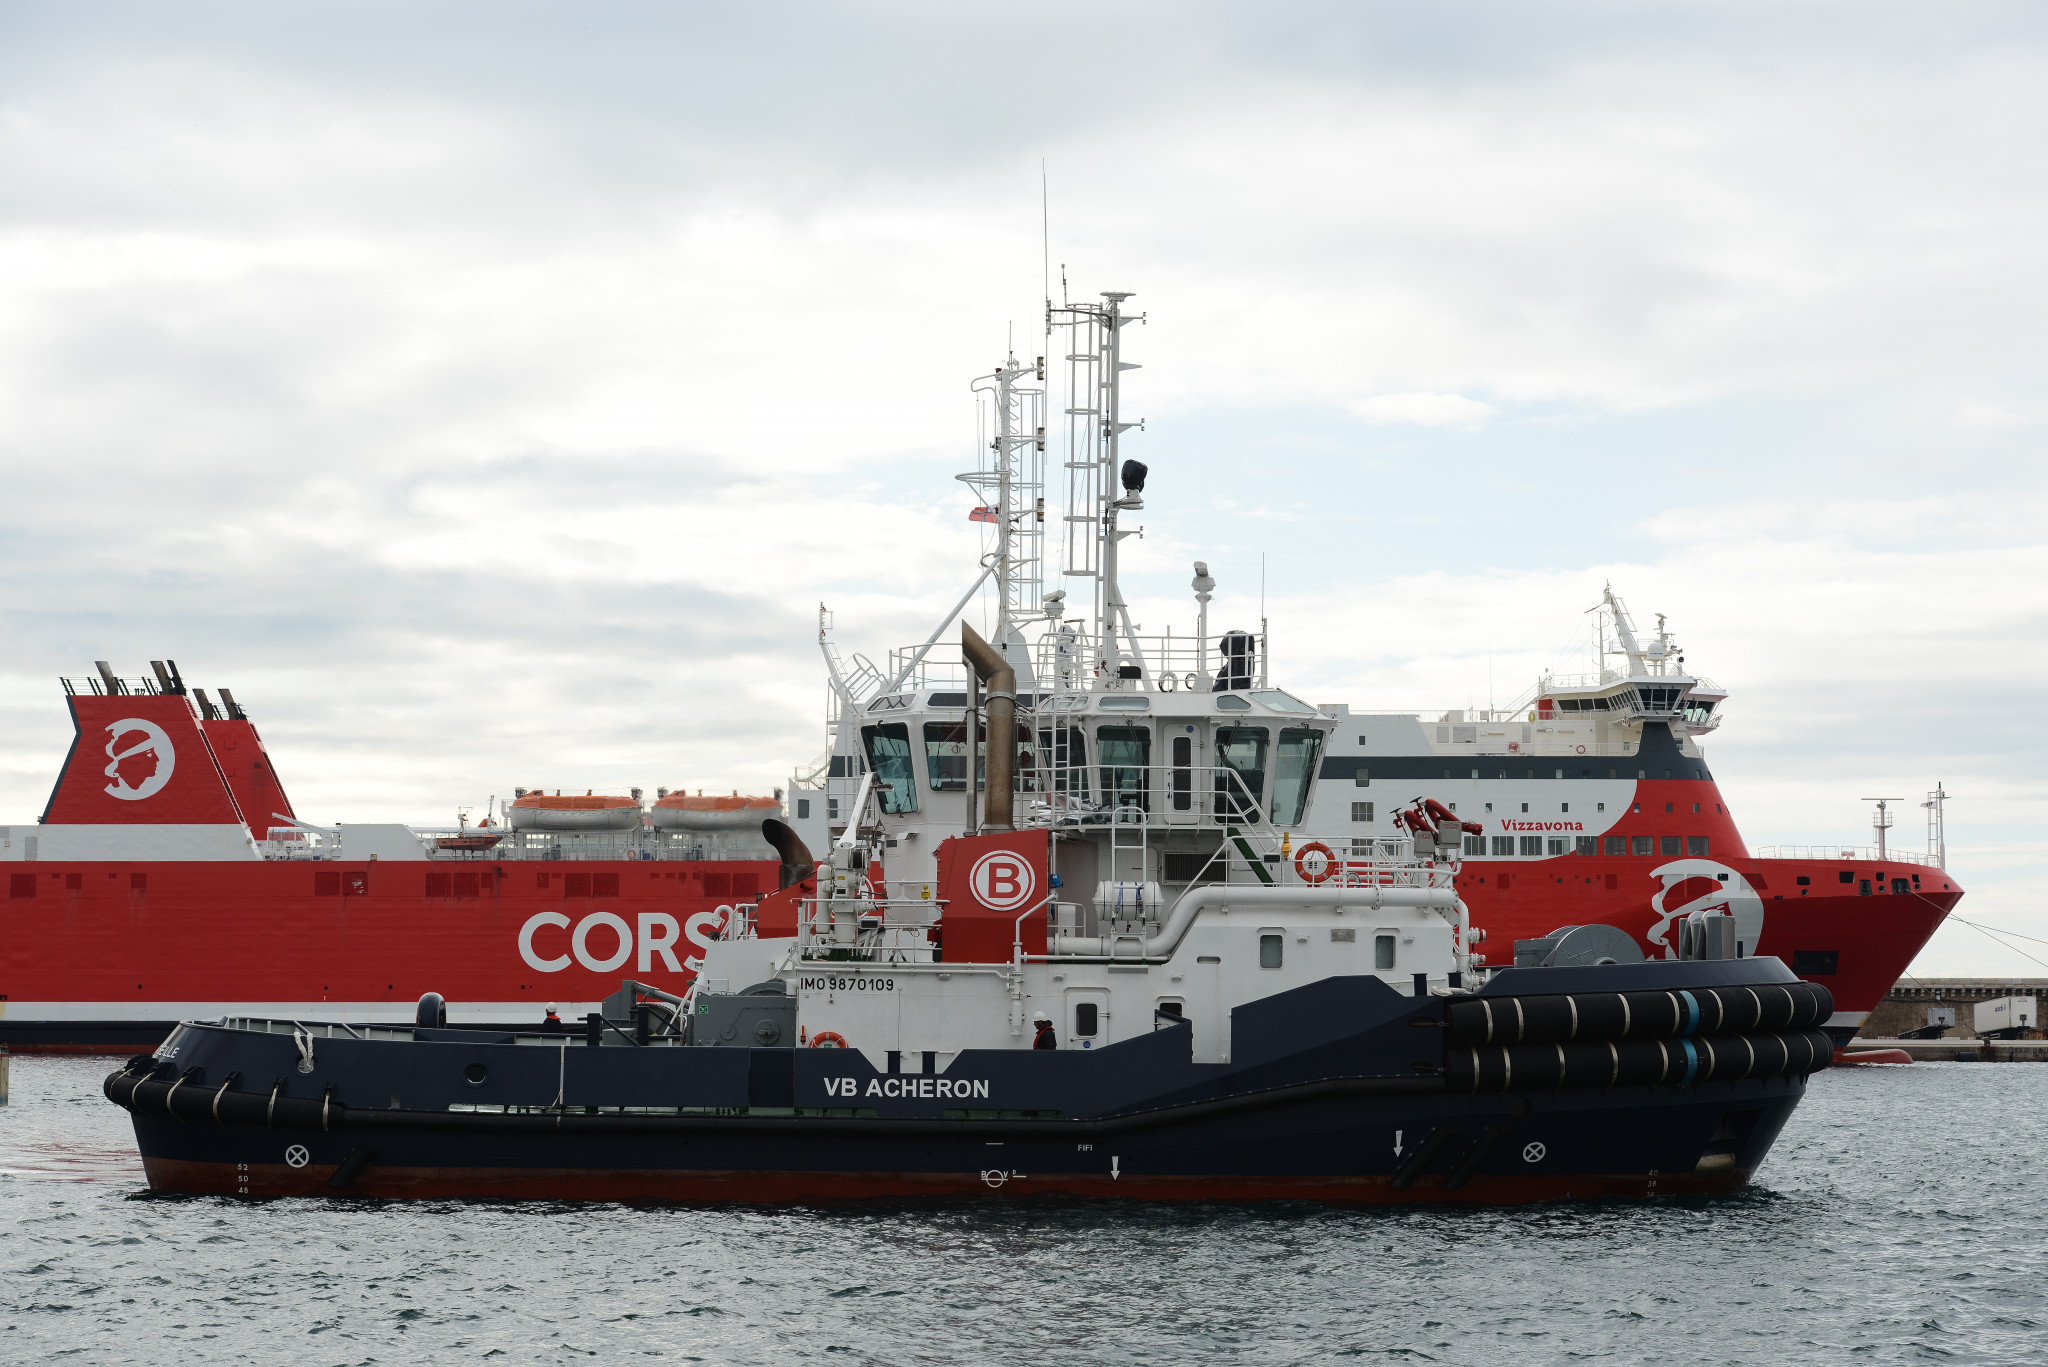 Boluda Towage France adds two new state-of-the-art tugs to fleet at Marseille-Fos port